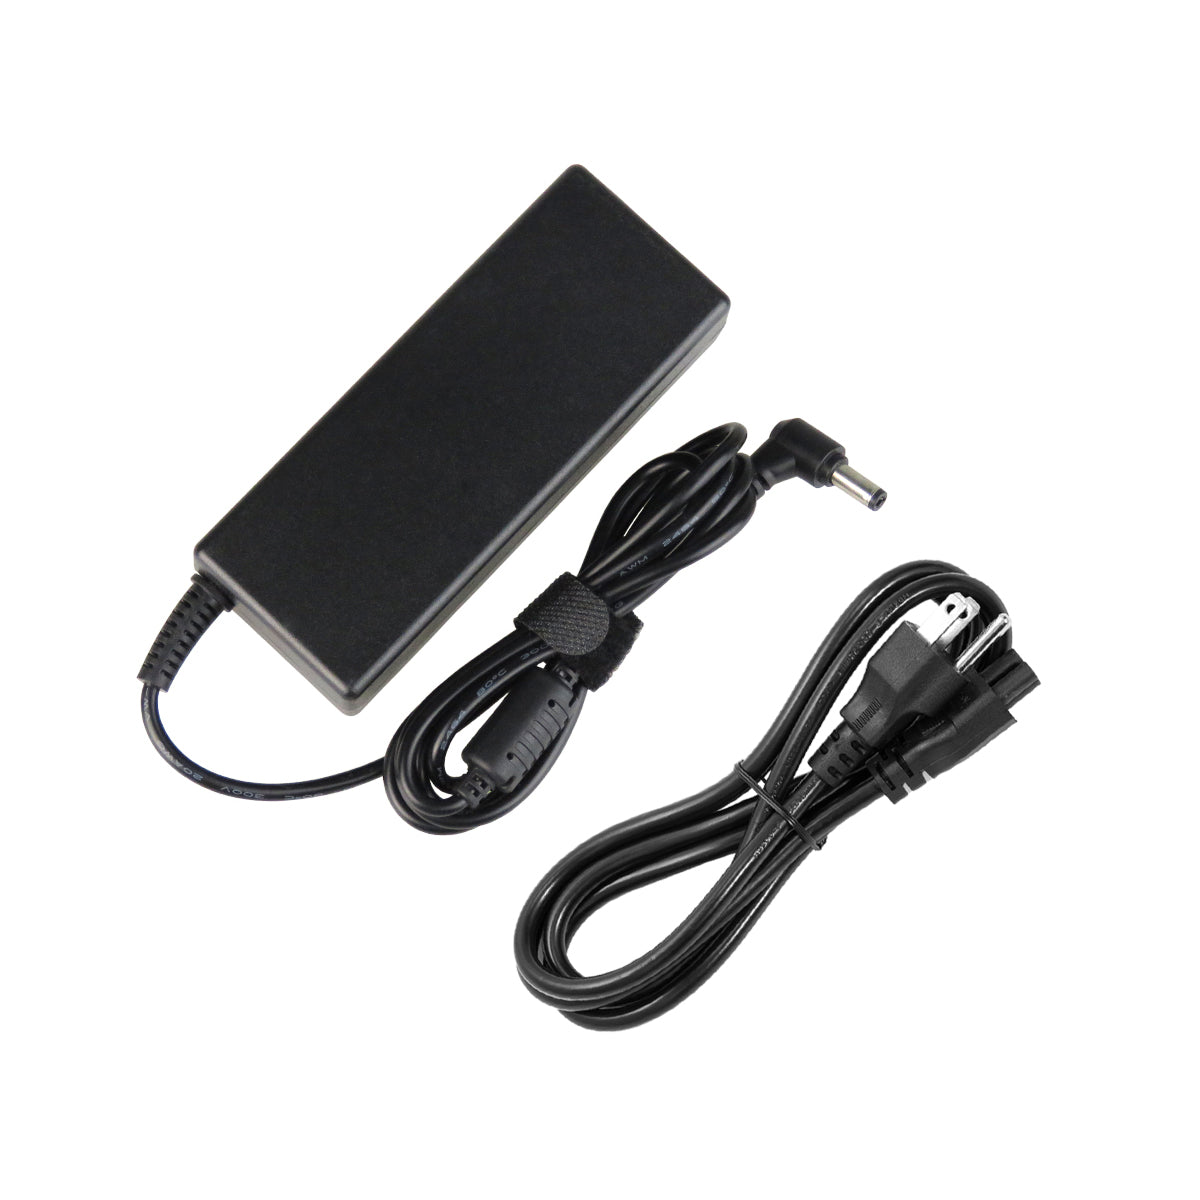 AC Adapter Charger for Gateway MT6728 Notebook.